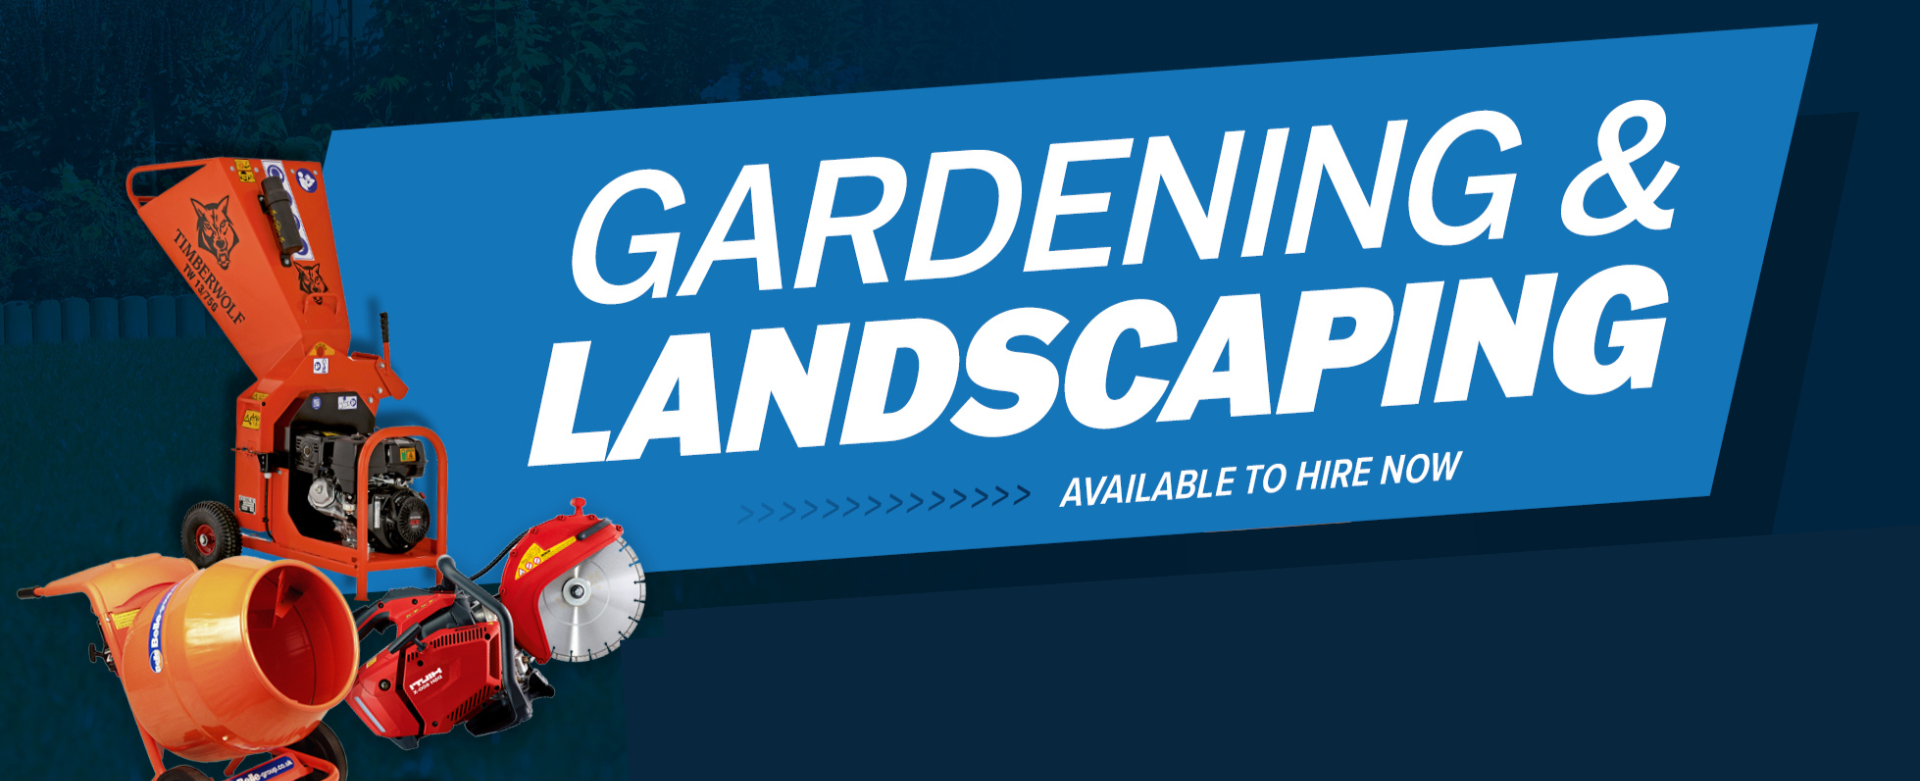 Tool_Hire_Landscaping_Banner